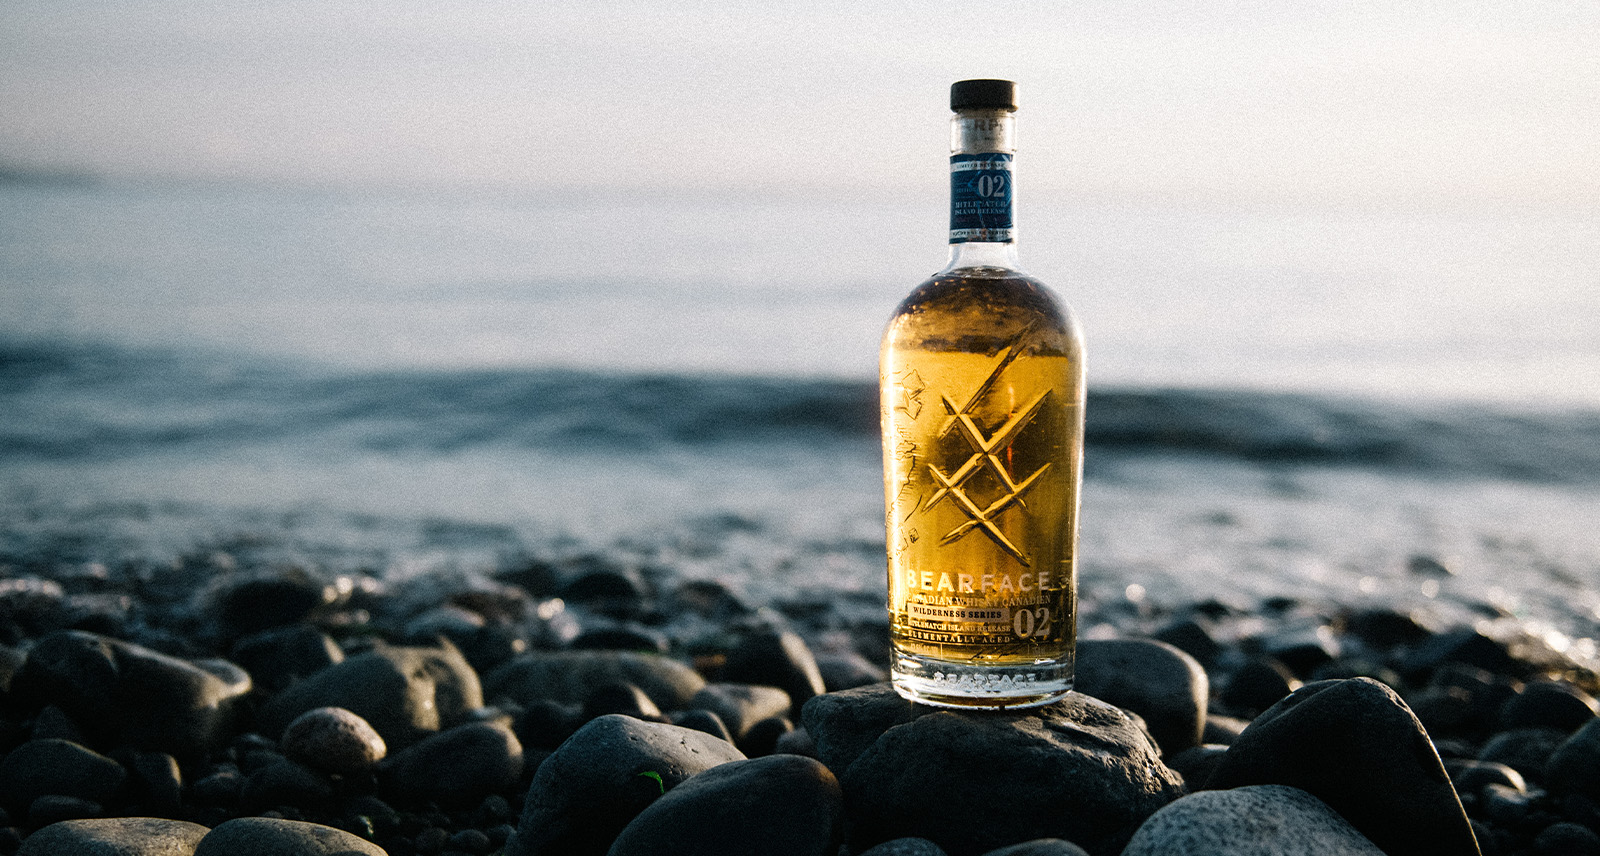 bearface whisky on a rocky shore by the ocean